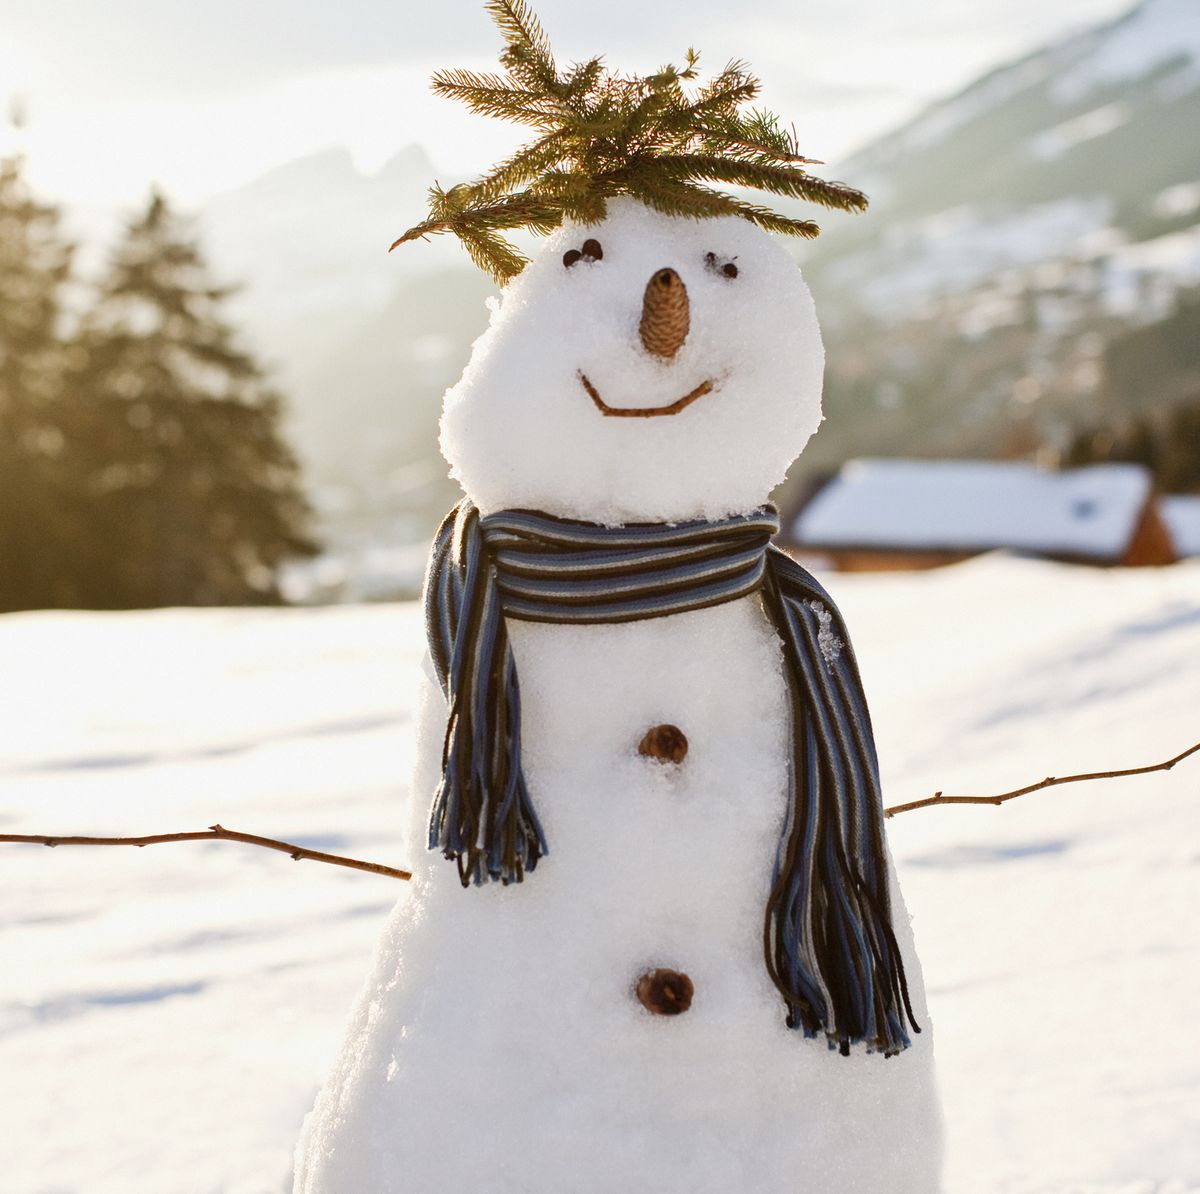 https://hips.hearstapps.com/hmg-prod/images/how-to-build-a-snowman-1670882043.jpg?crop=0.670xw:1.00xh;0.184xw,0&resize=1200:*